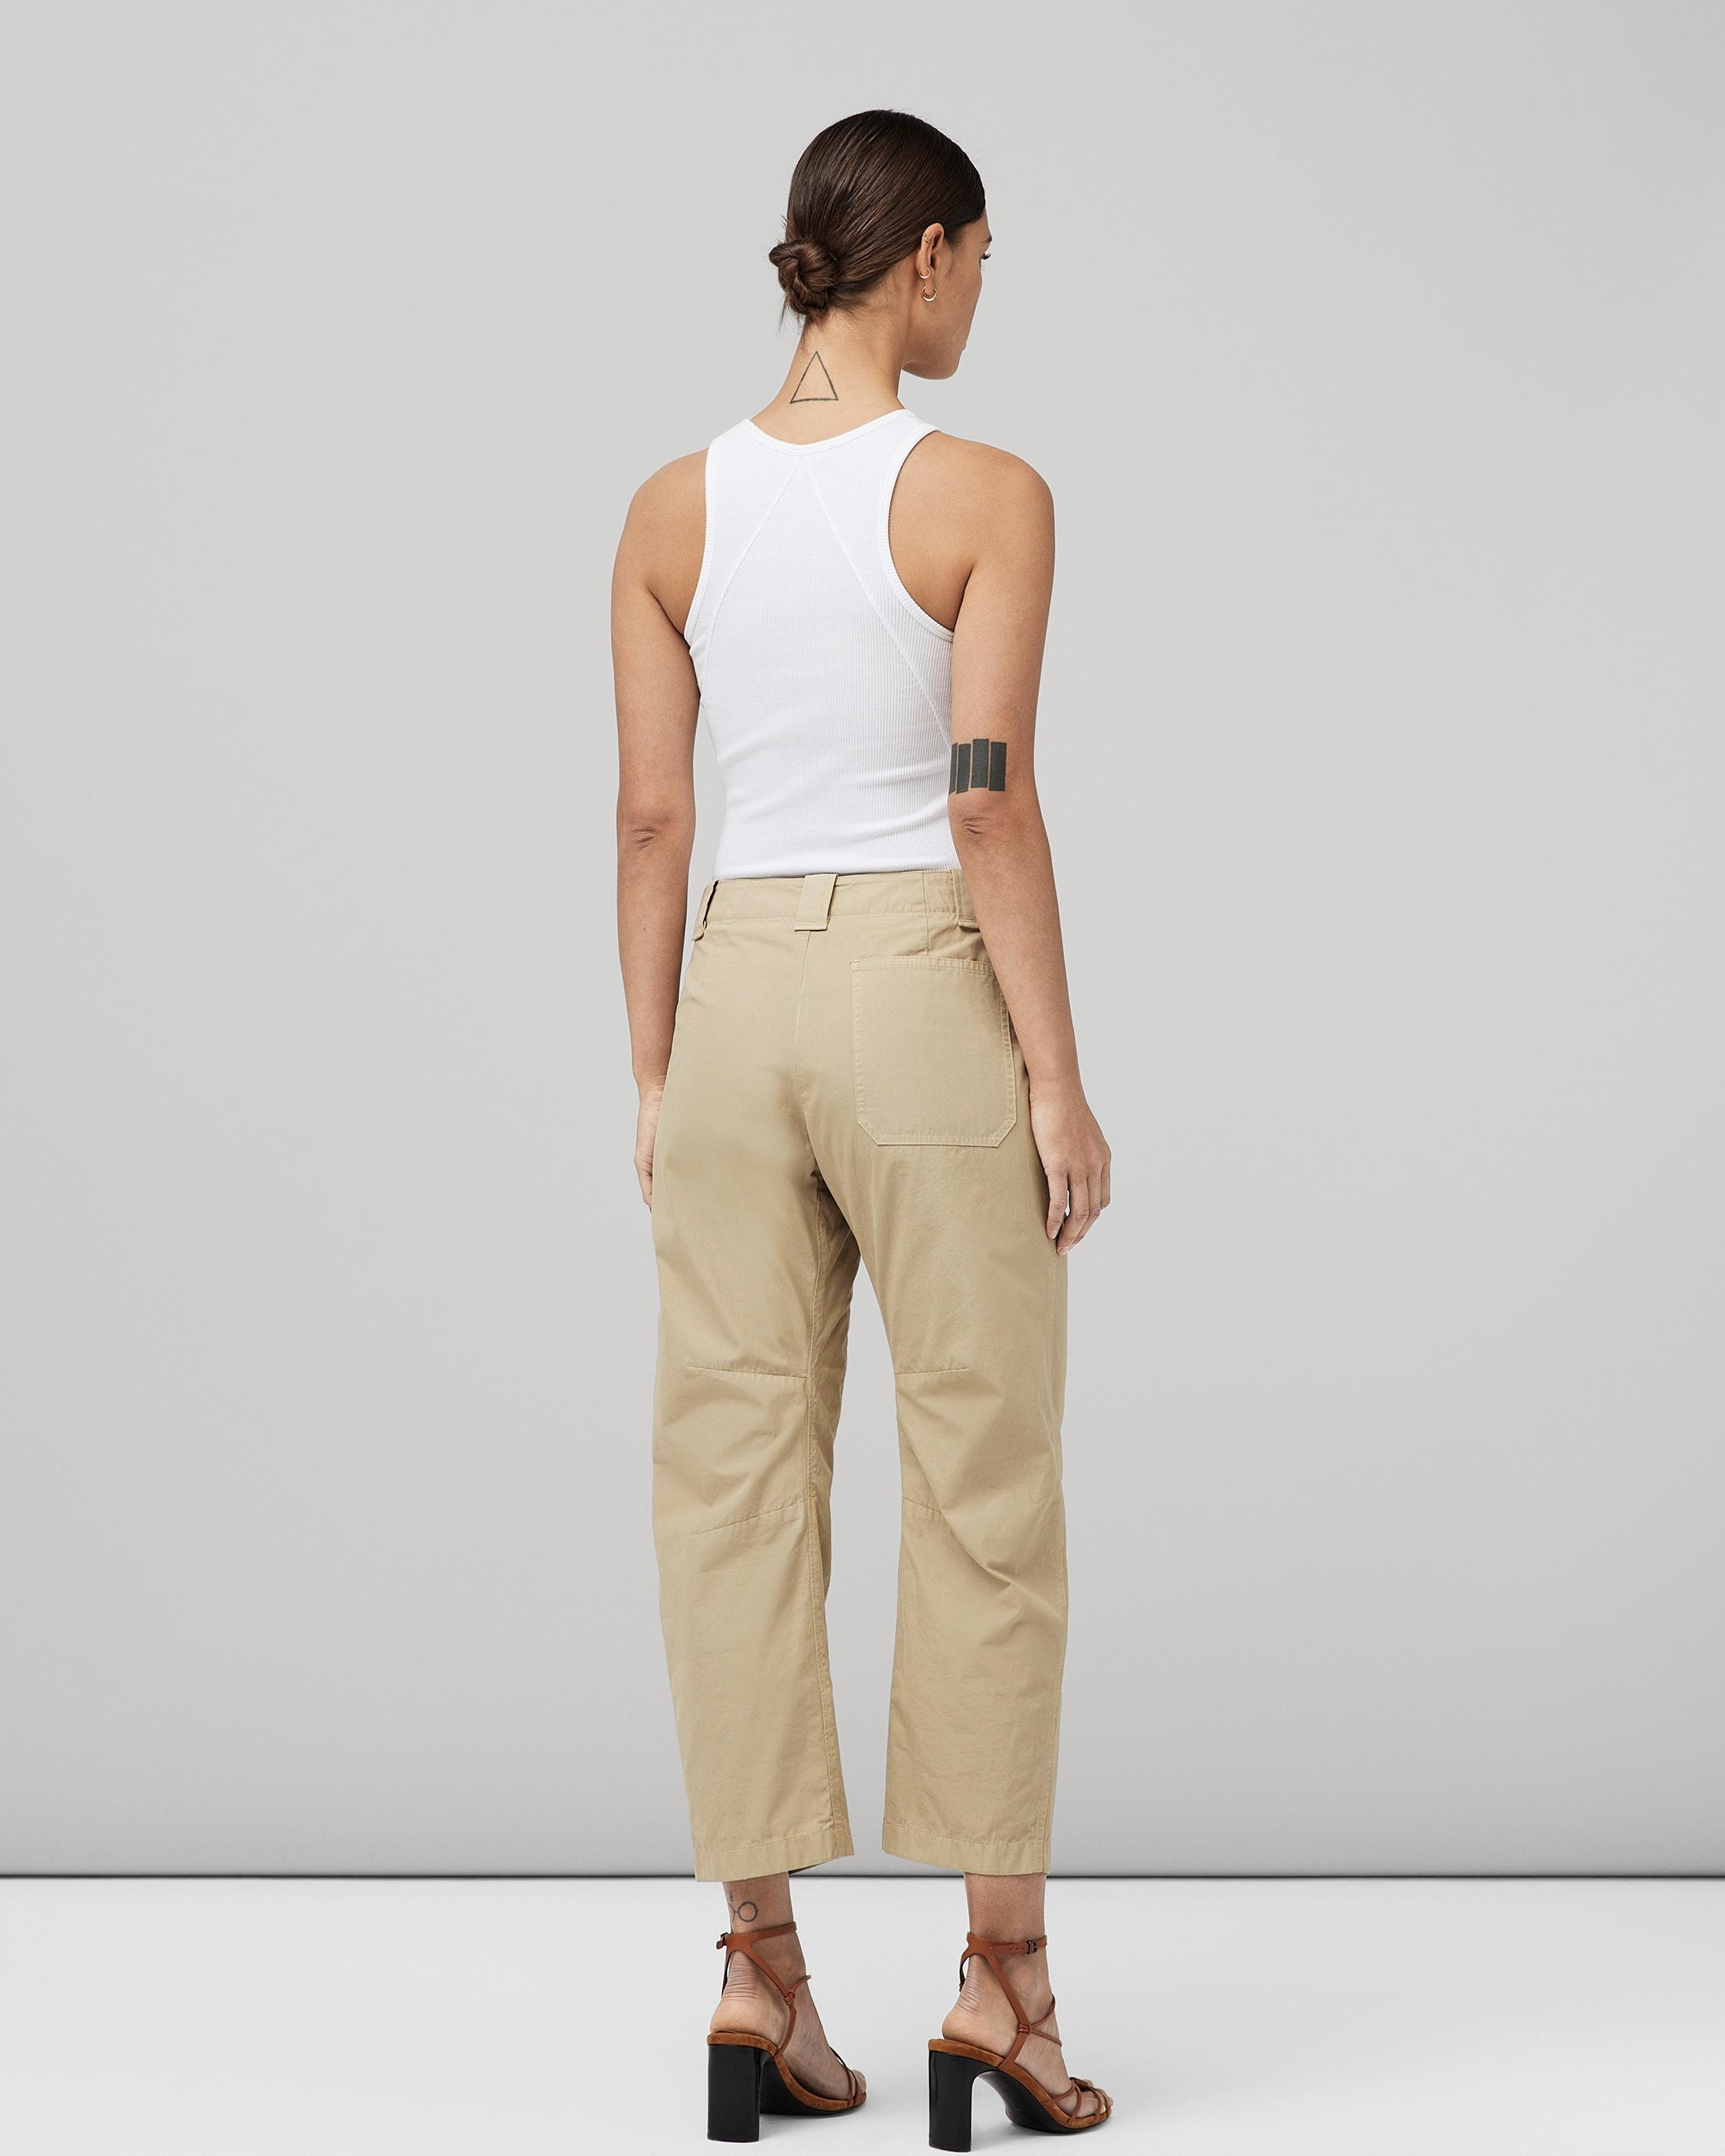 Leyton Workwear Cotton Pant
Relaxed Fit - 6